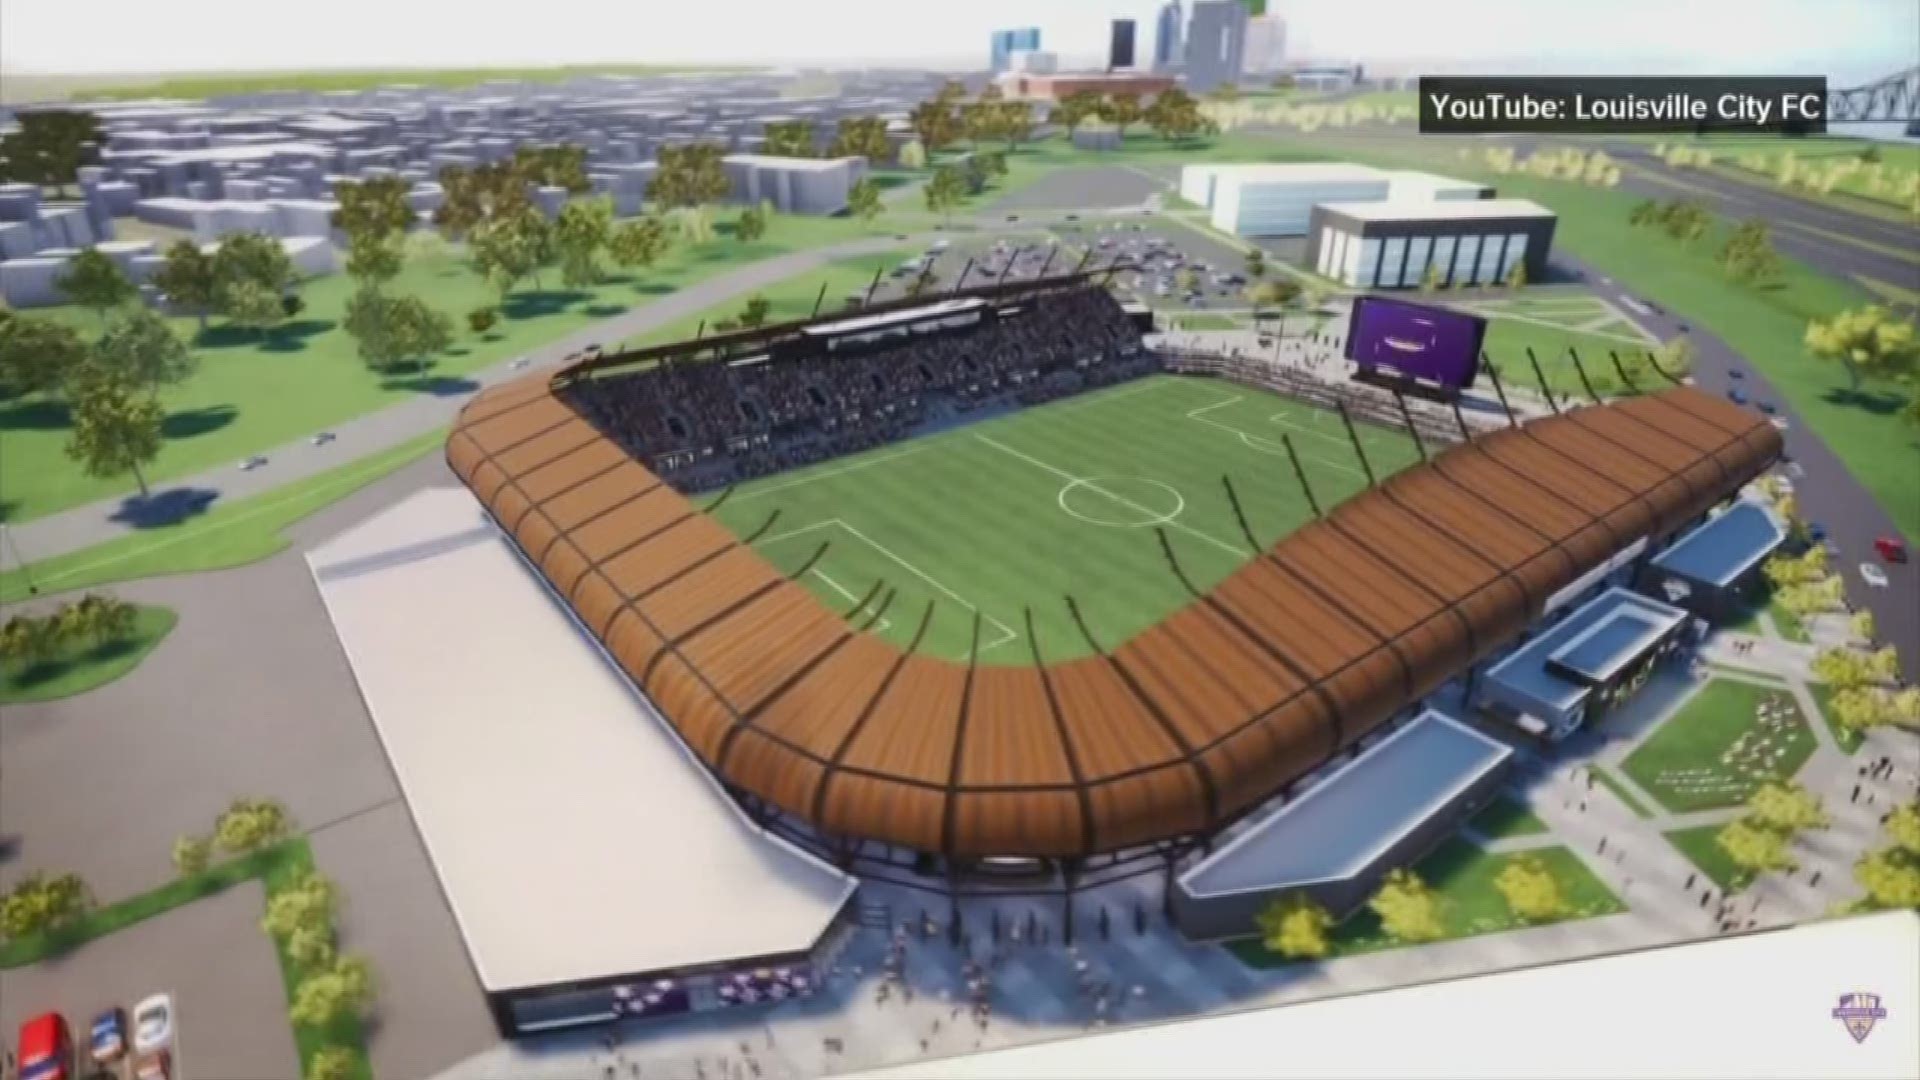 Get a detailed look of Lou City's new soccer stadium with their new virtual tour video.